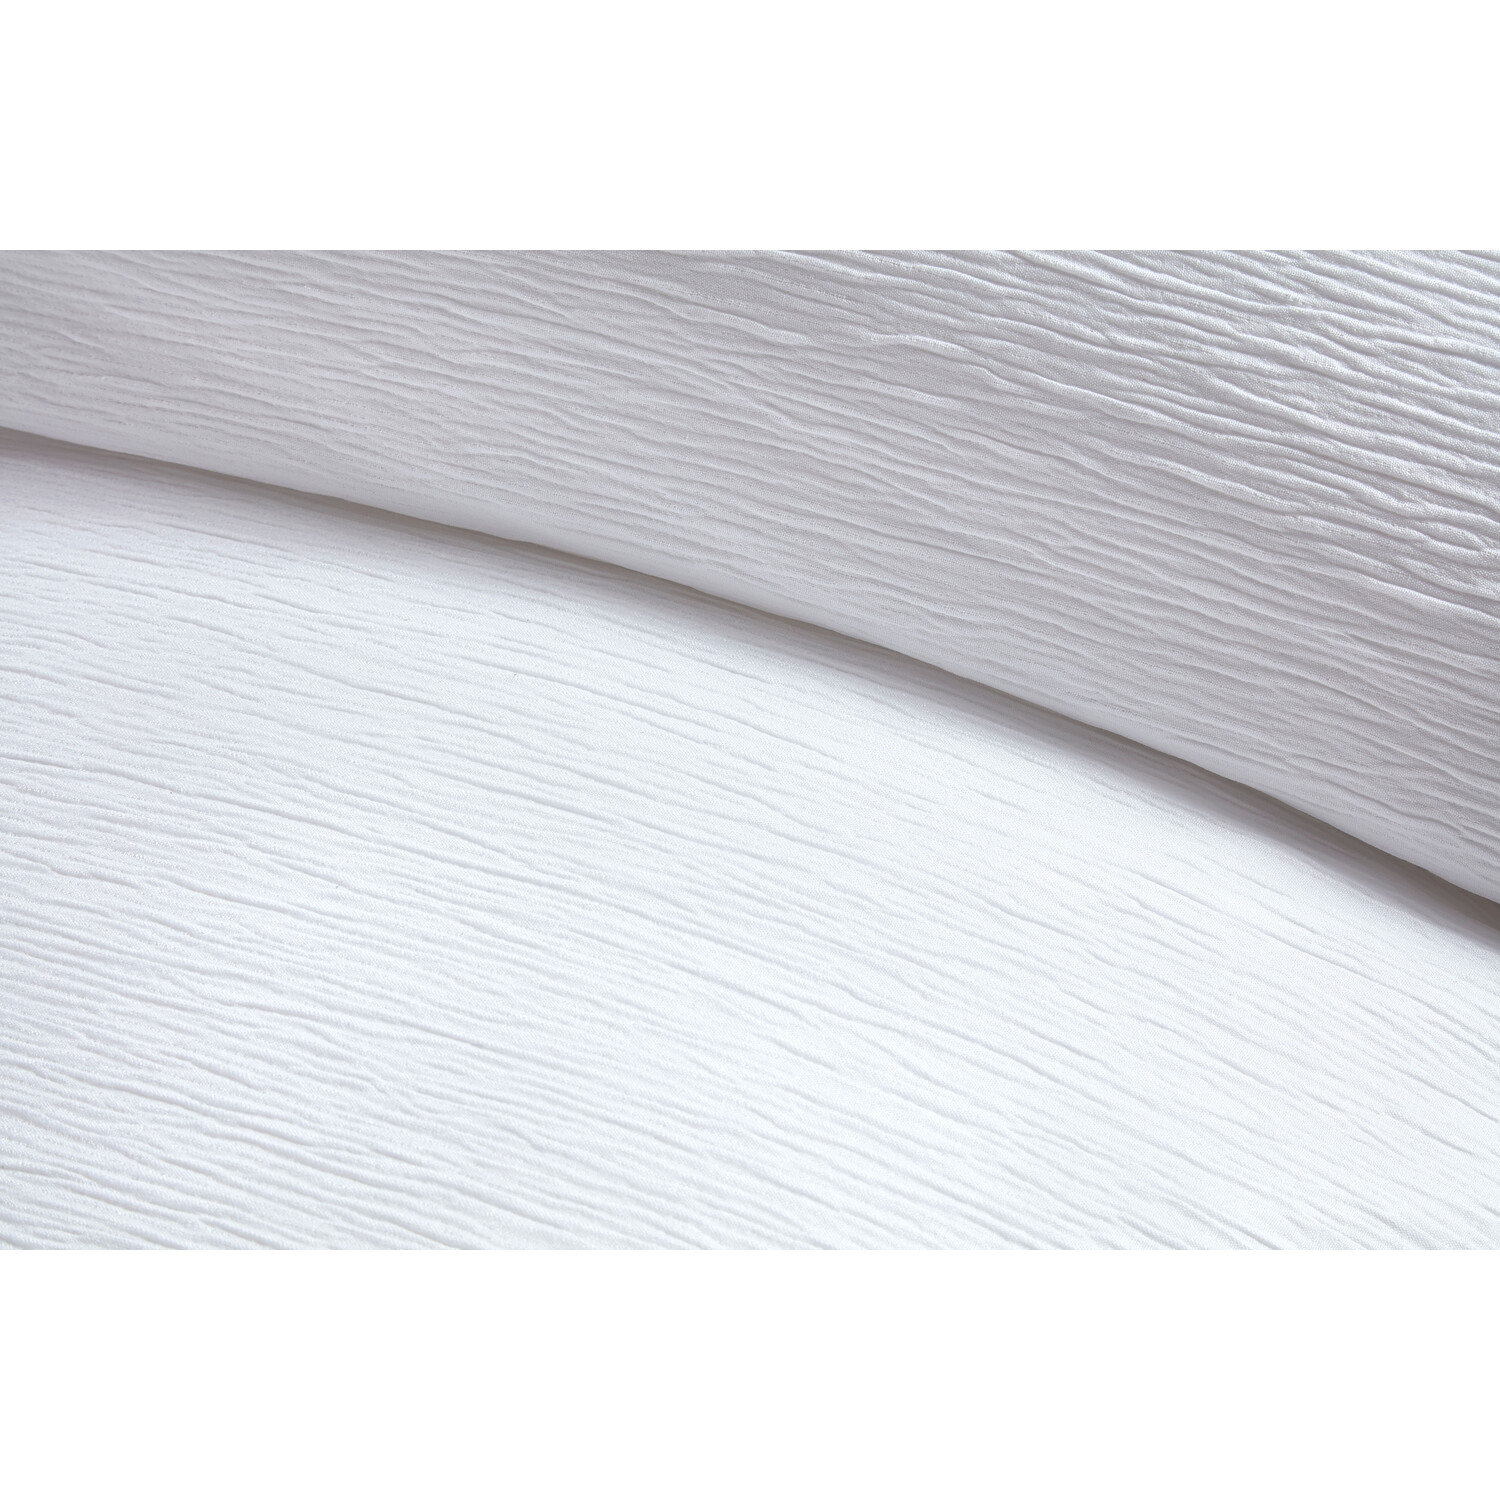 My Home Milan Double White Textured Duvet Cover Set Image 4